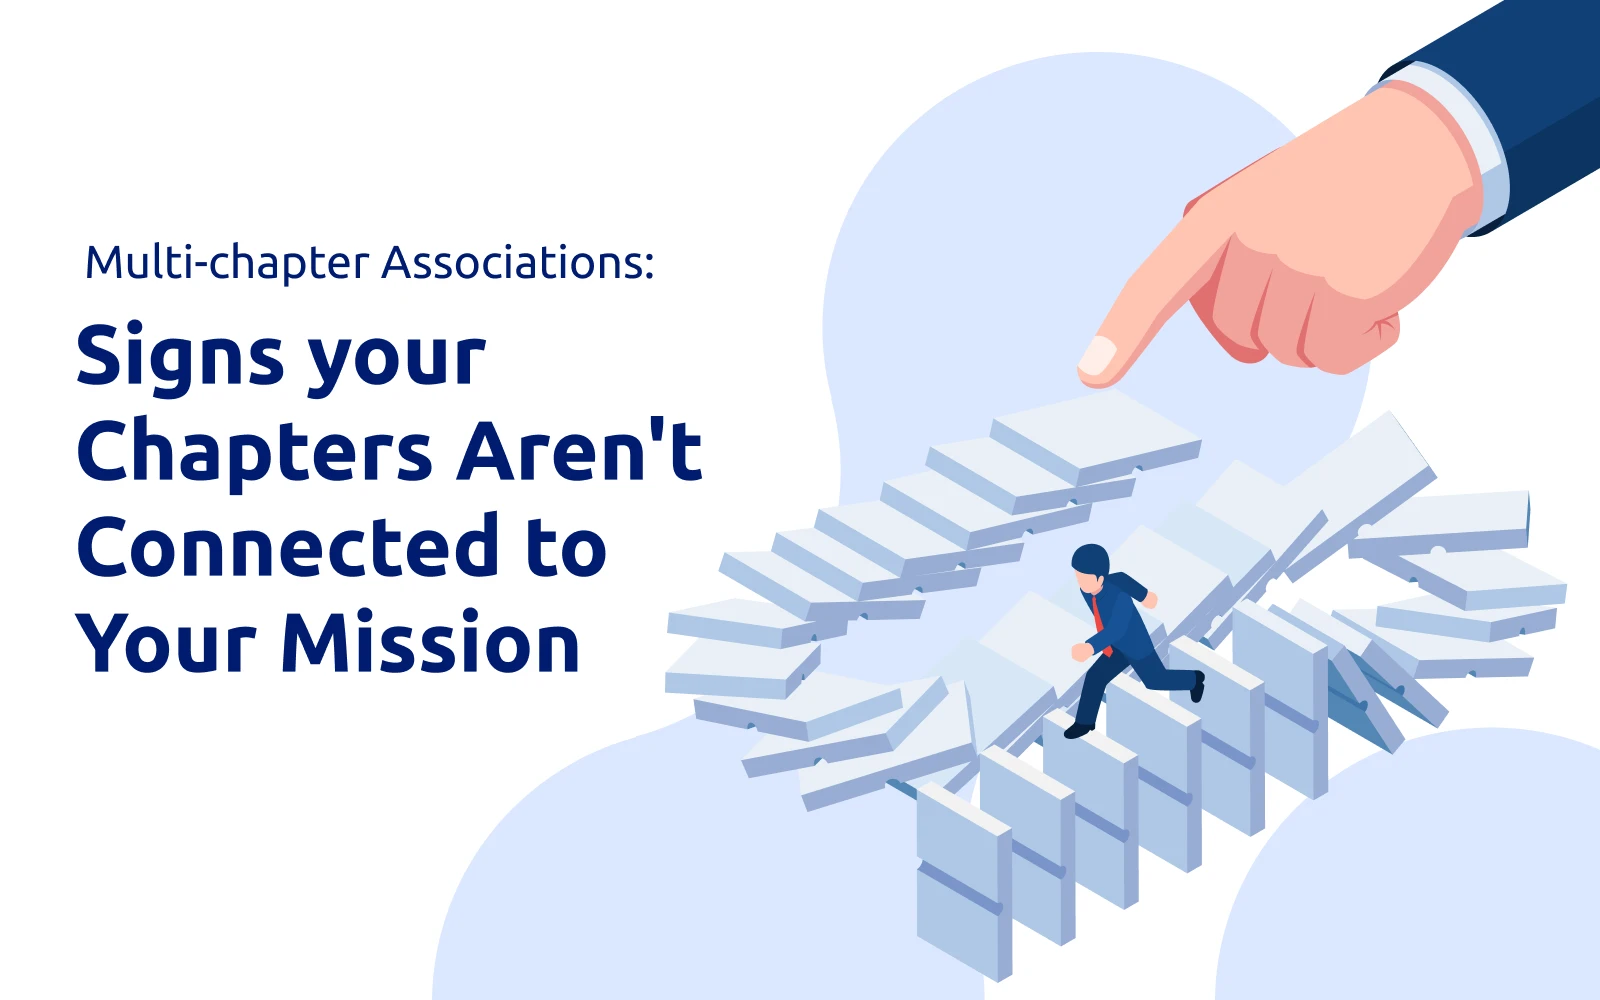 Multi-Chapter Organizations: Signs your Chapters Aren't Connected to Your Mission